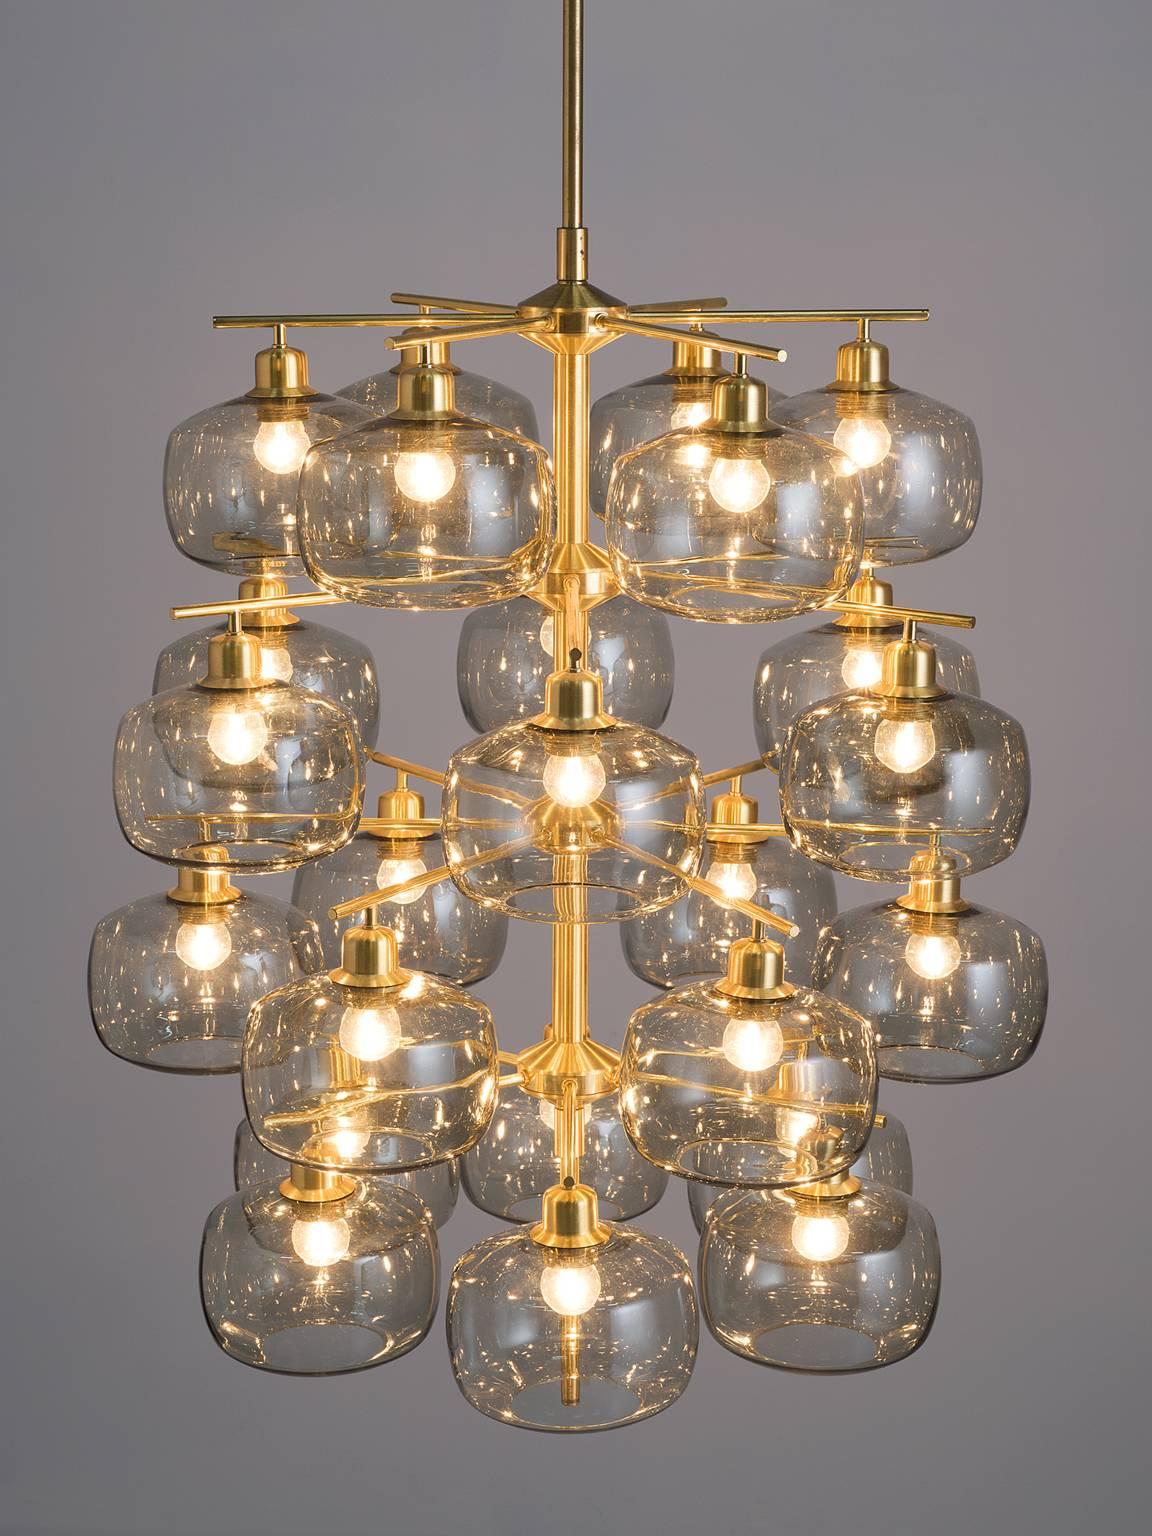 Holger Johansson for Westal, chandelier, brass, smoked glass, Sweden, 1952

This large, exceptional chandelier features a brass frame and translucent bulbs that resemble 'pressed' spheres. This midcentury pendant is original thanks to the shape,